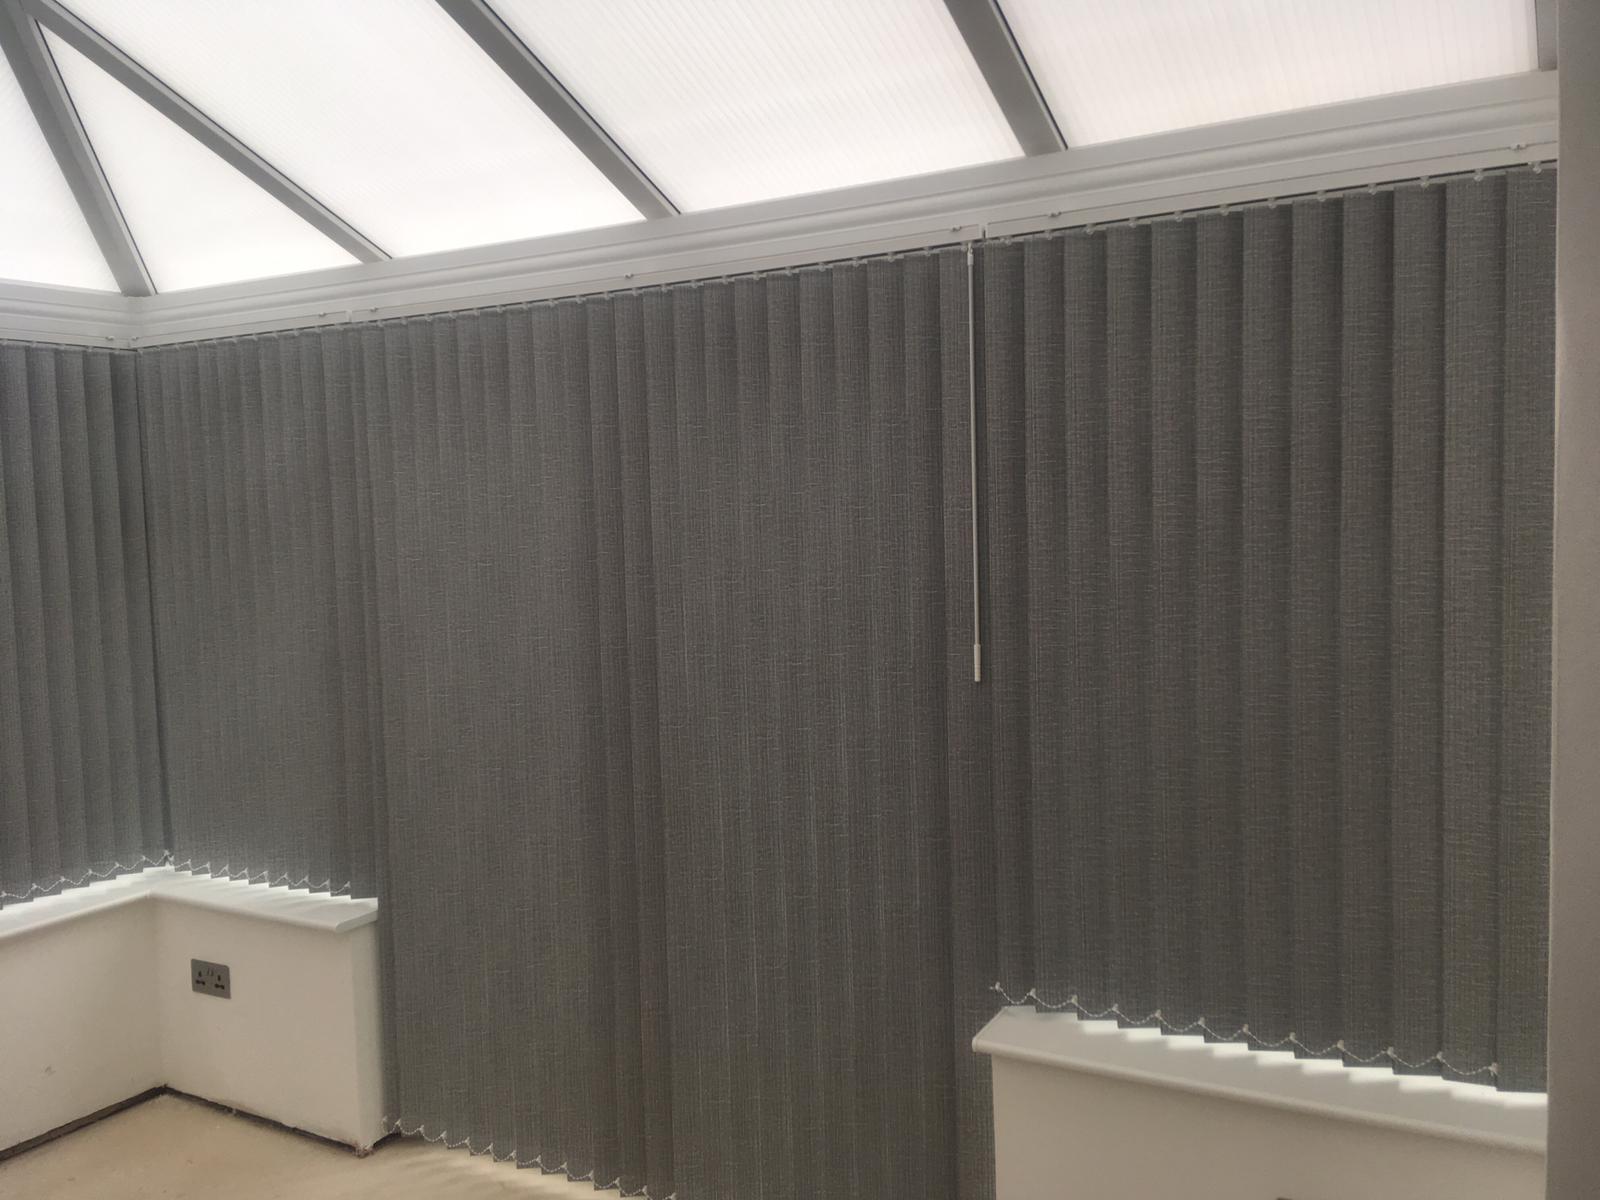 Suppliers of Customizable Vertical Blinds Designs